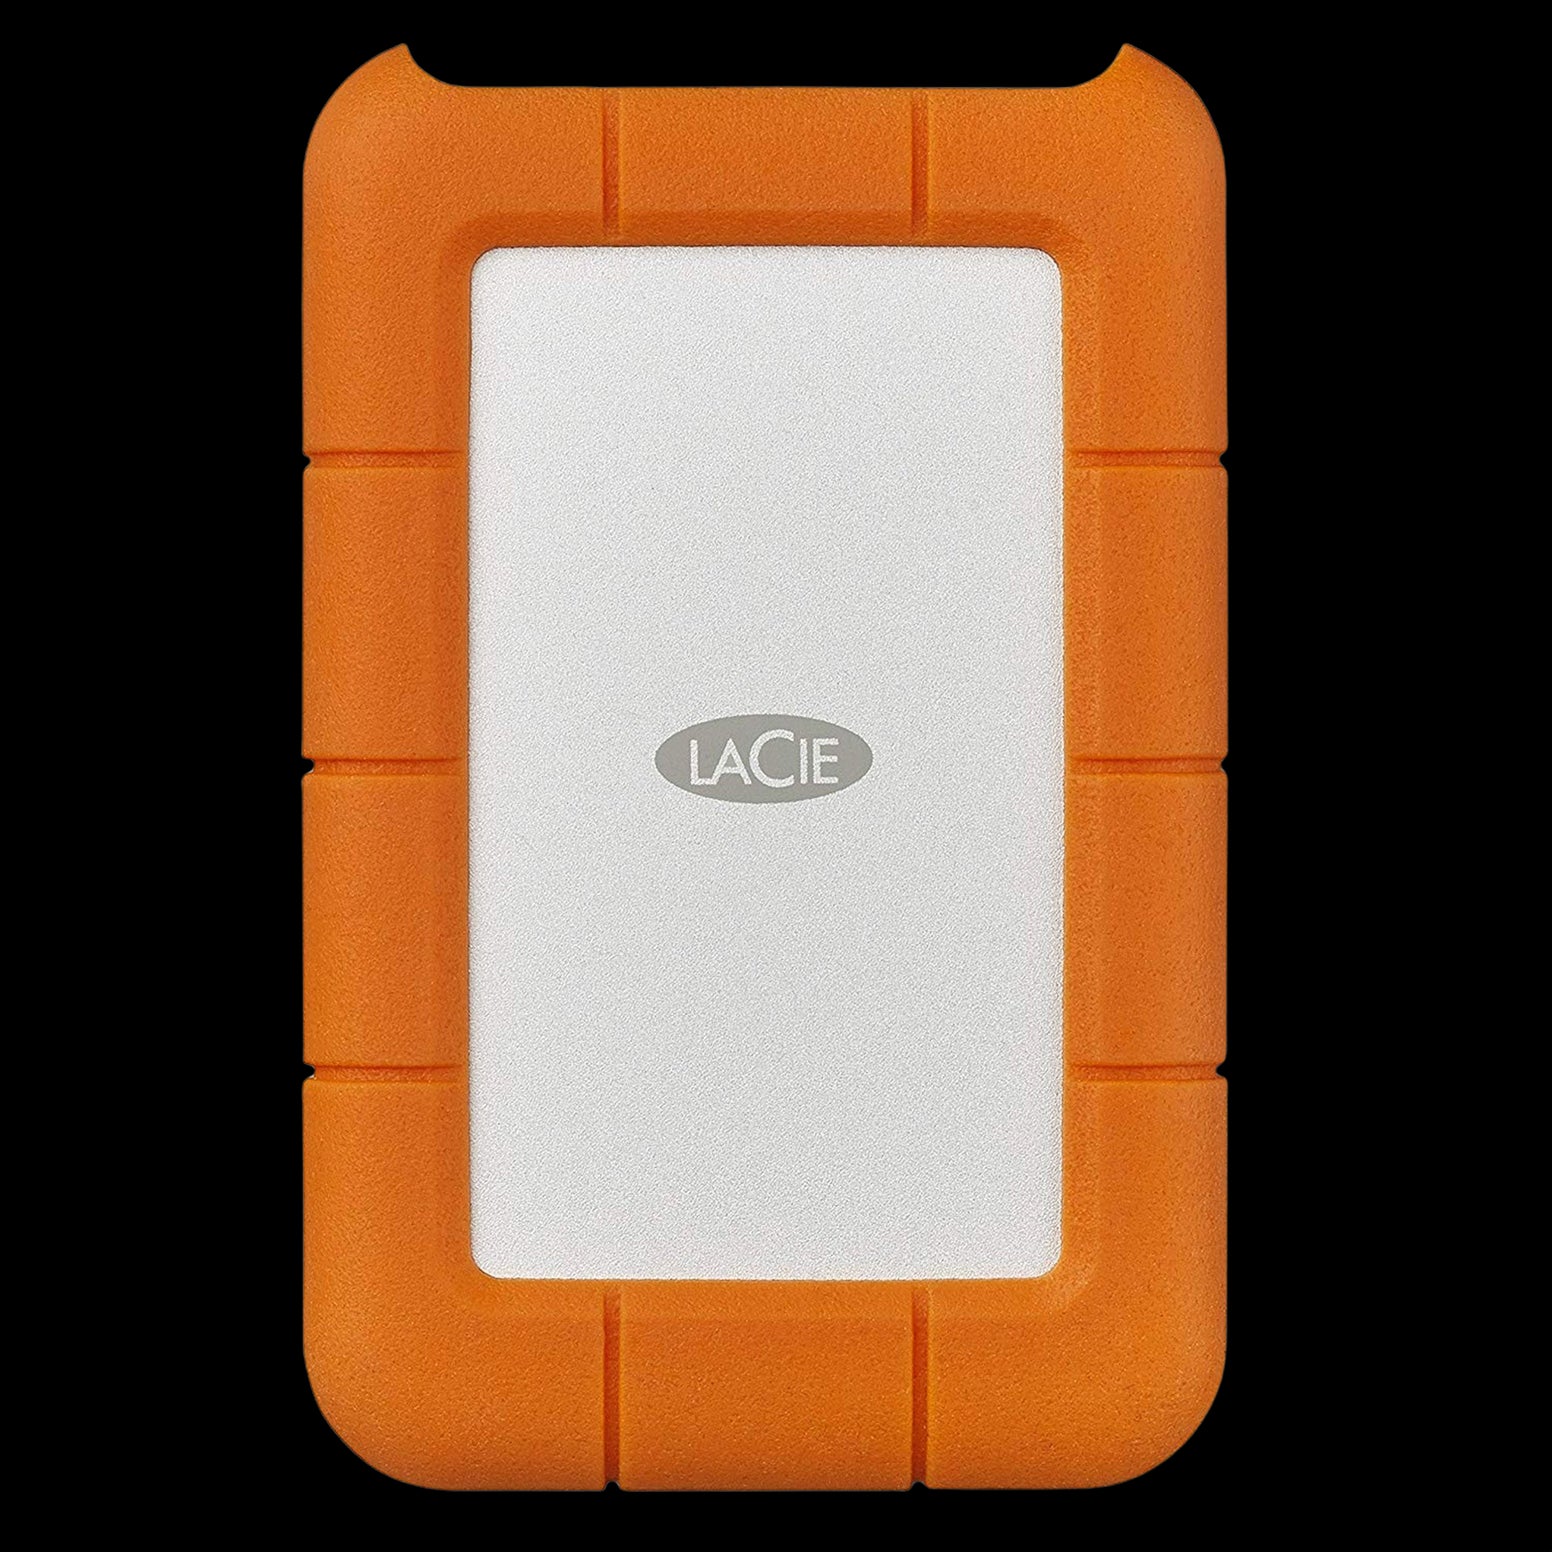 LaCie 1TB HDD Rugged USB-C Mobile Hard Drive (USB 3.1, Type-C) - Discontinued